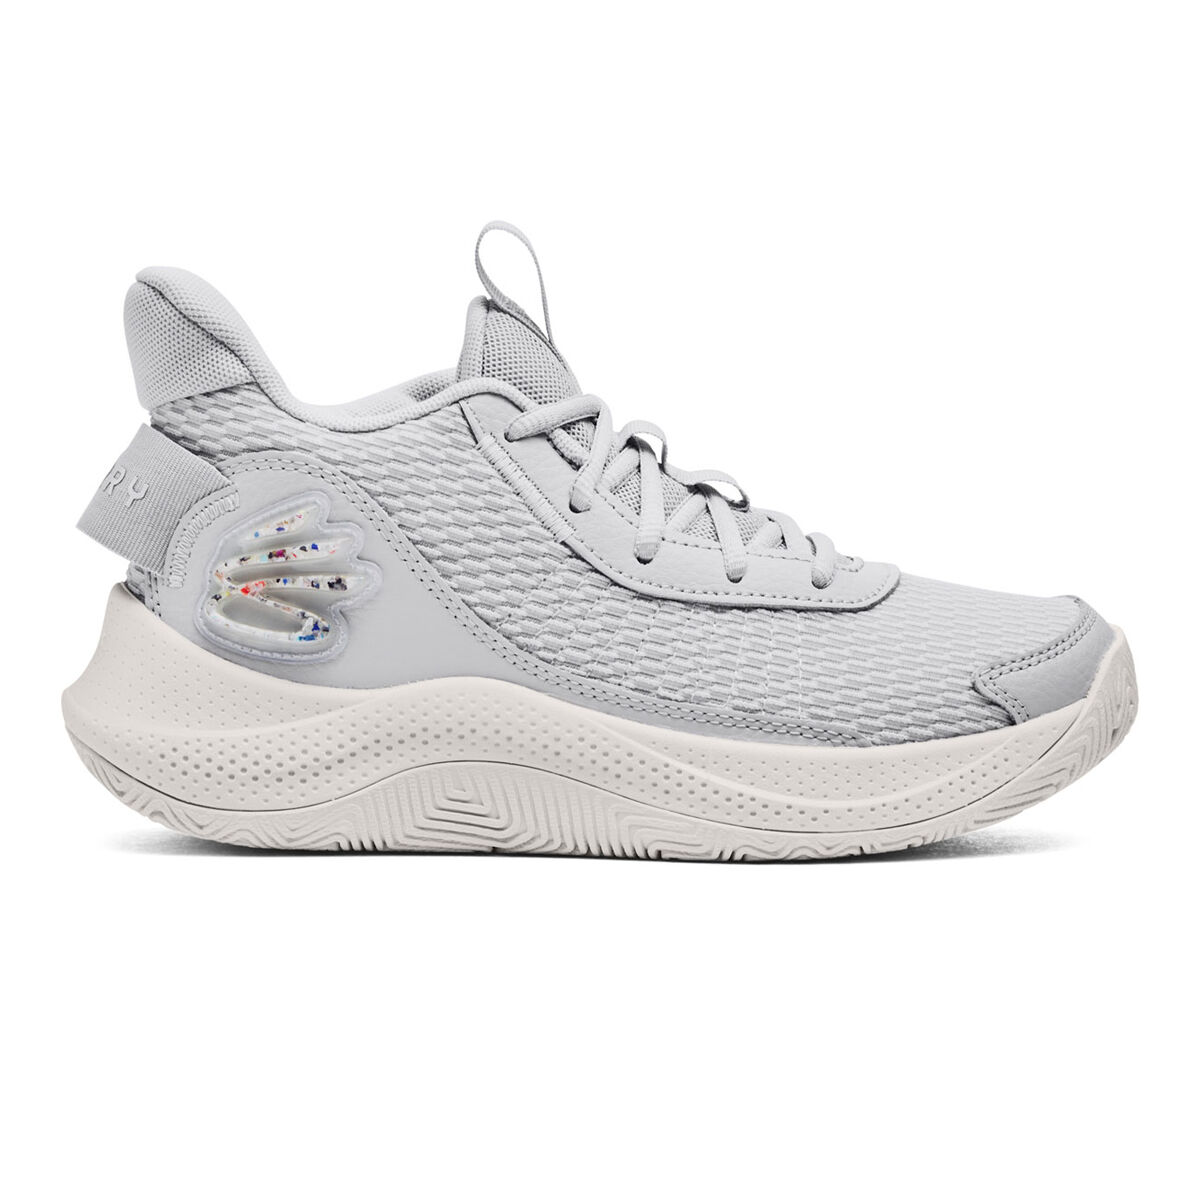 Under Armour Curry 3Z7 GS Basketball Shoes | Rebel Sport